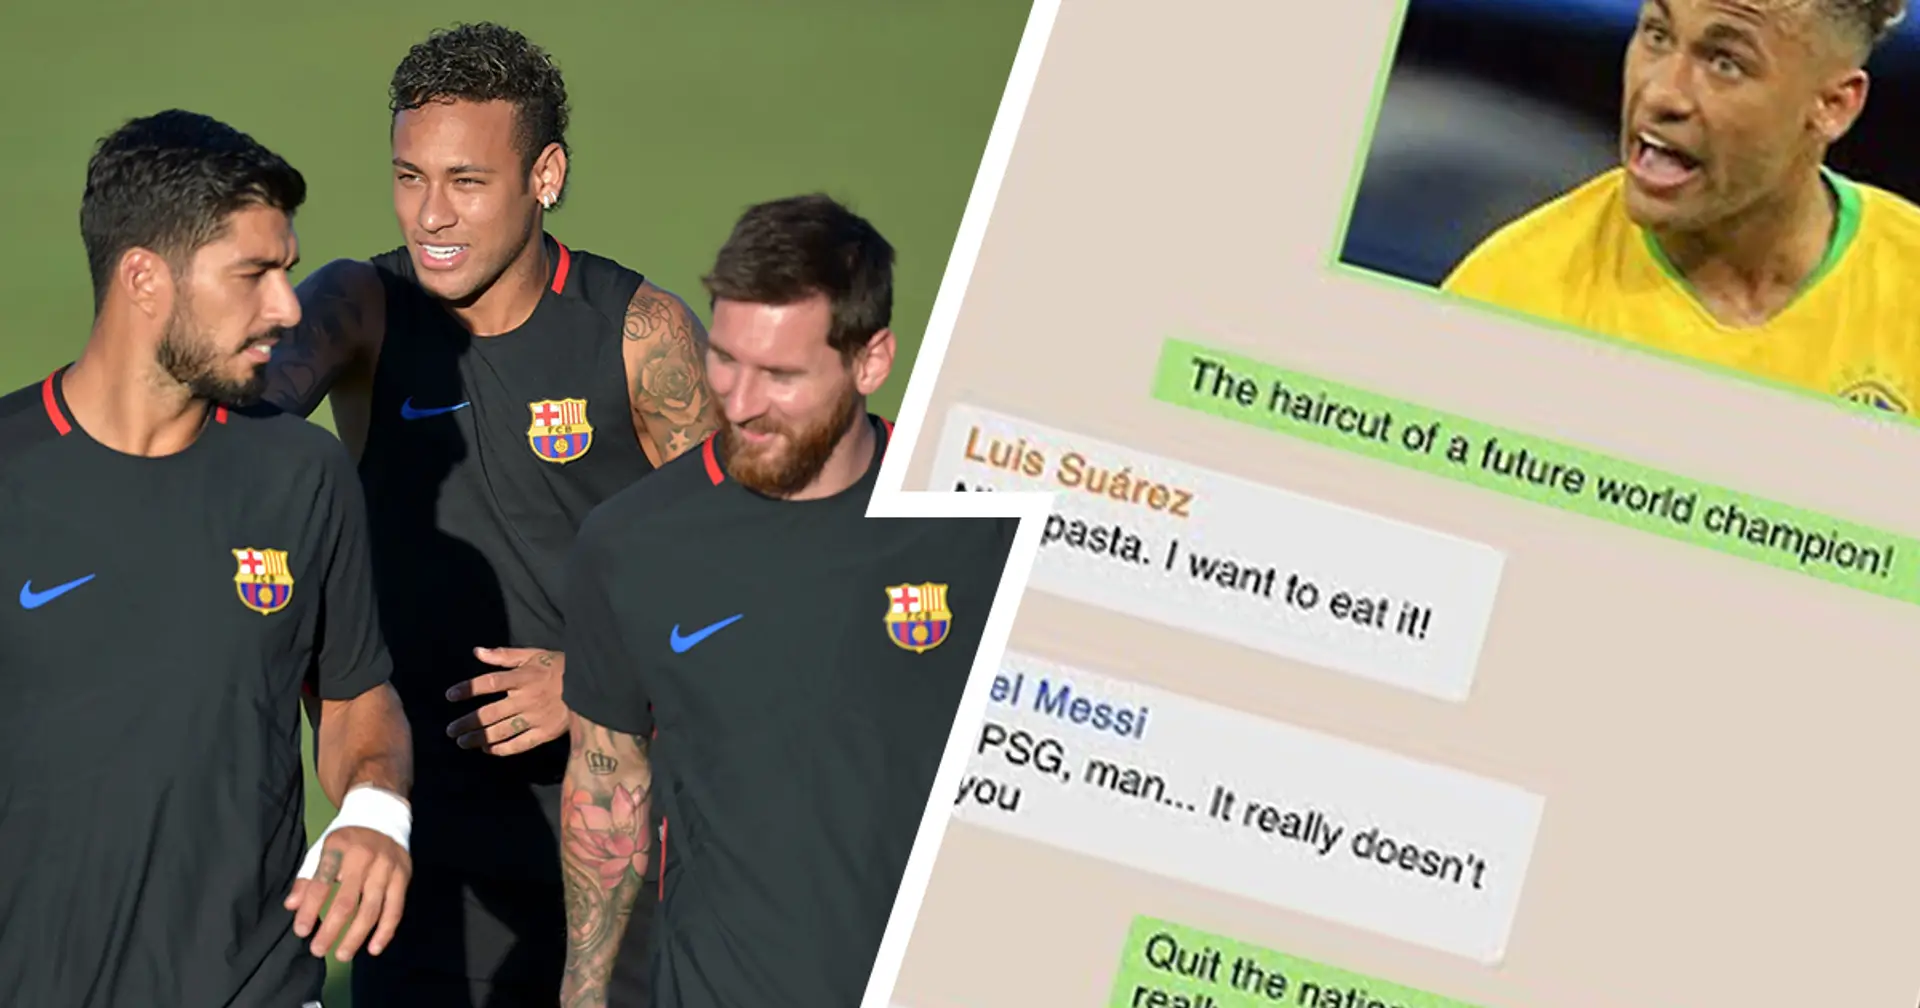 'Thx man, was a crap match': Barca fan imagines WhatsApp chat between Neymar, Messi, Suarez and Alba after Clasico